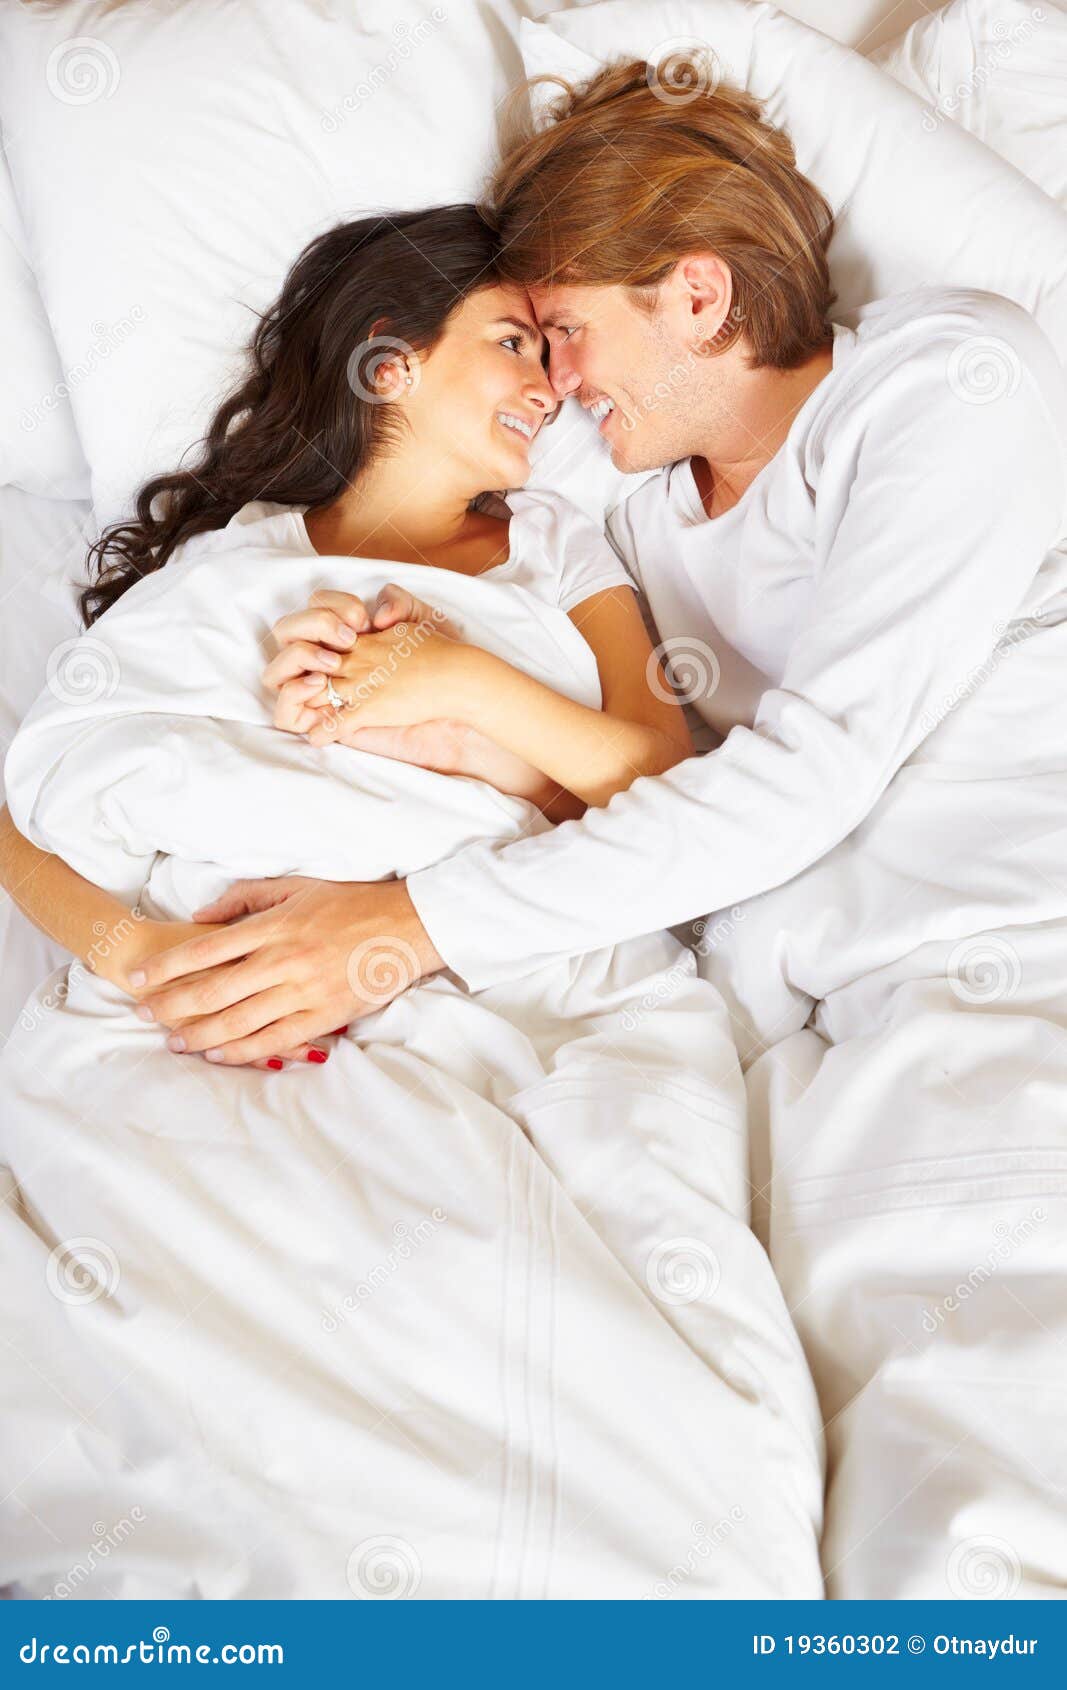 Couple Showing Romance On Bed S